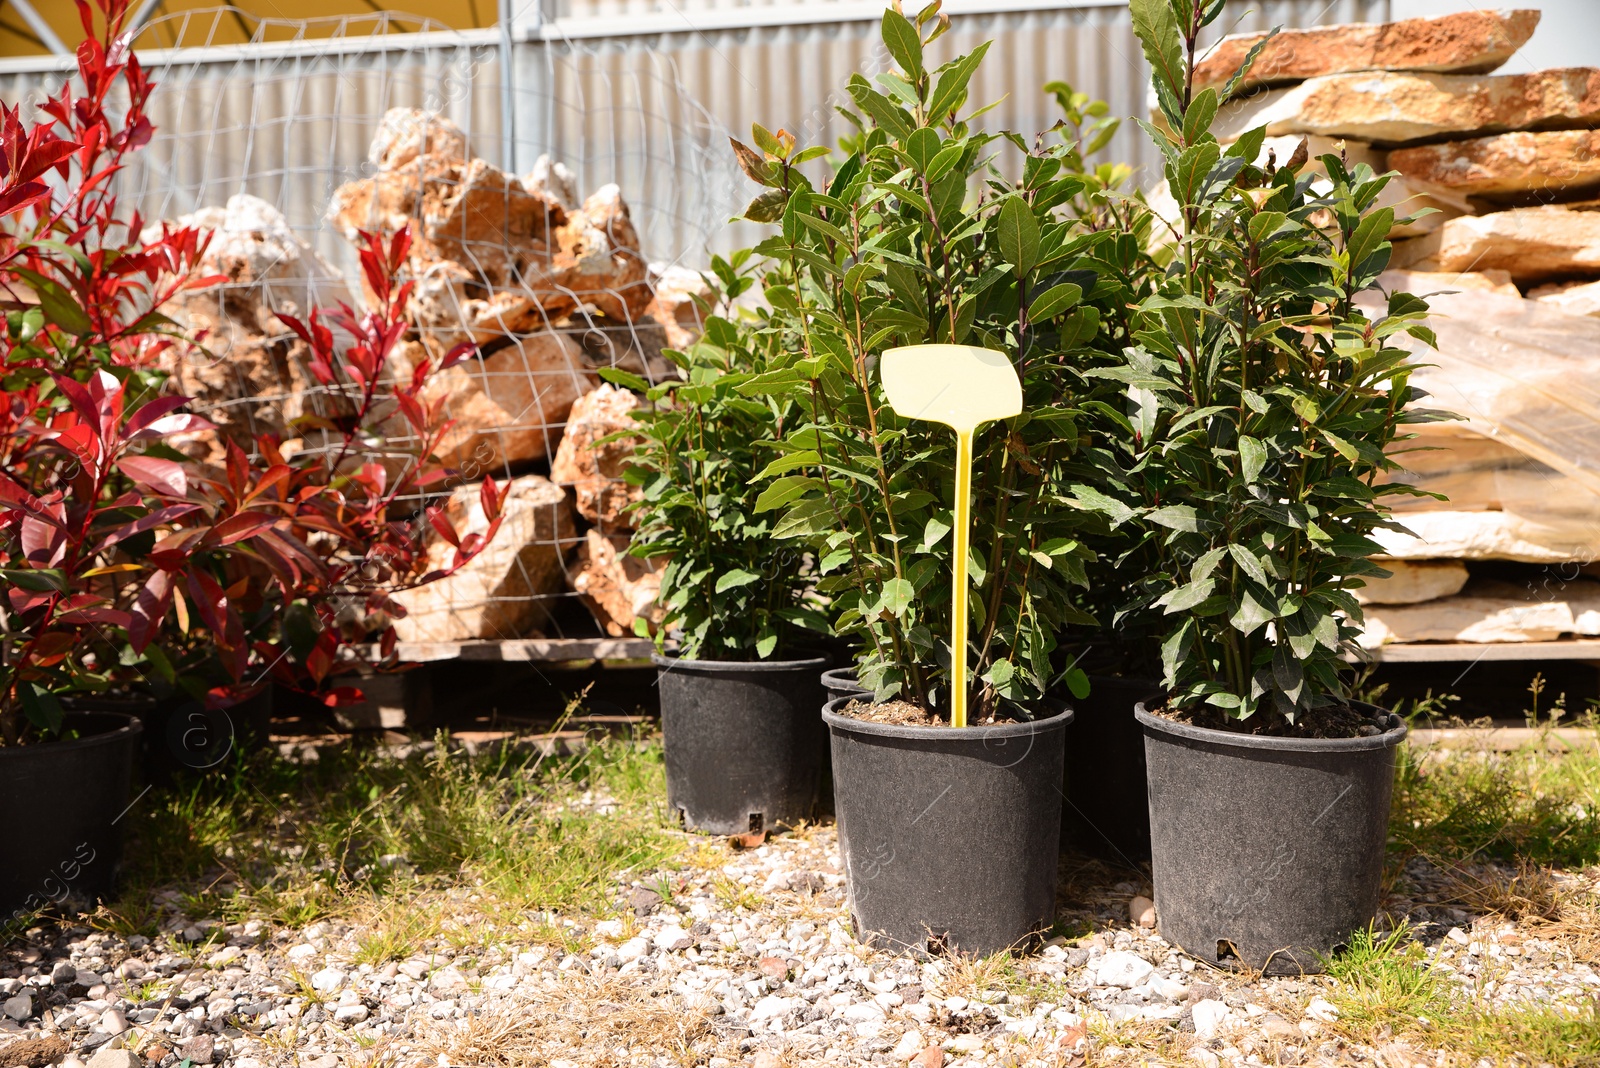 Photo of Many pots with bay laurel plants outdoors on sunny day